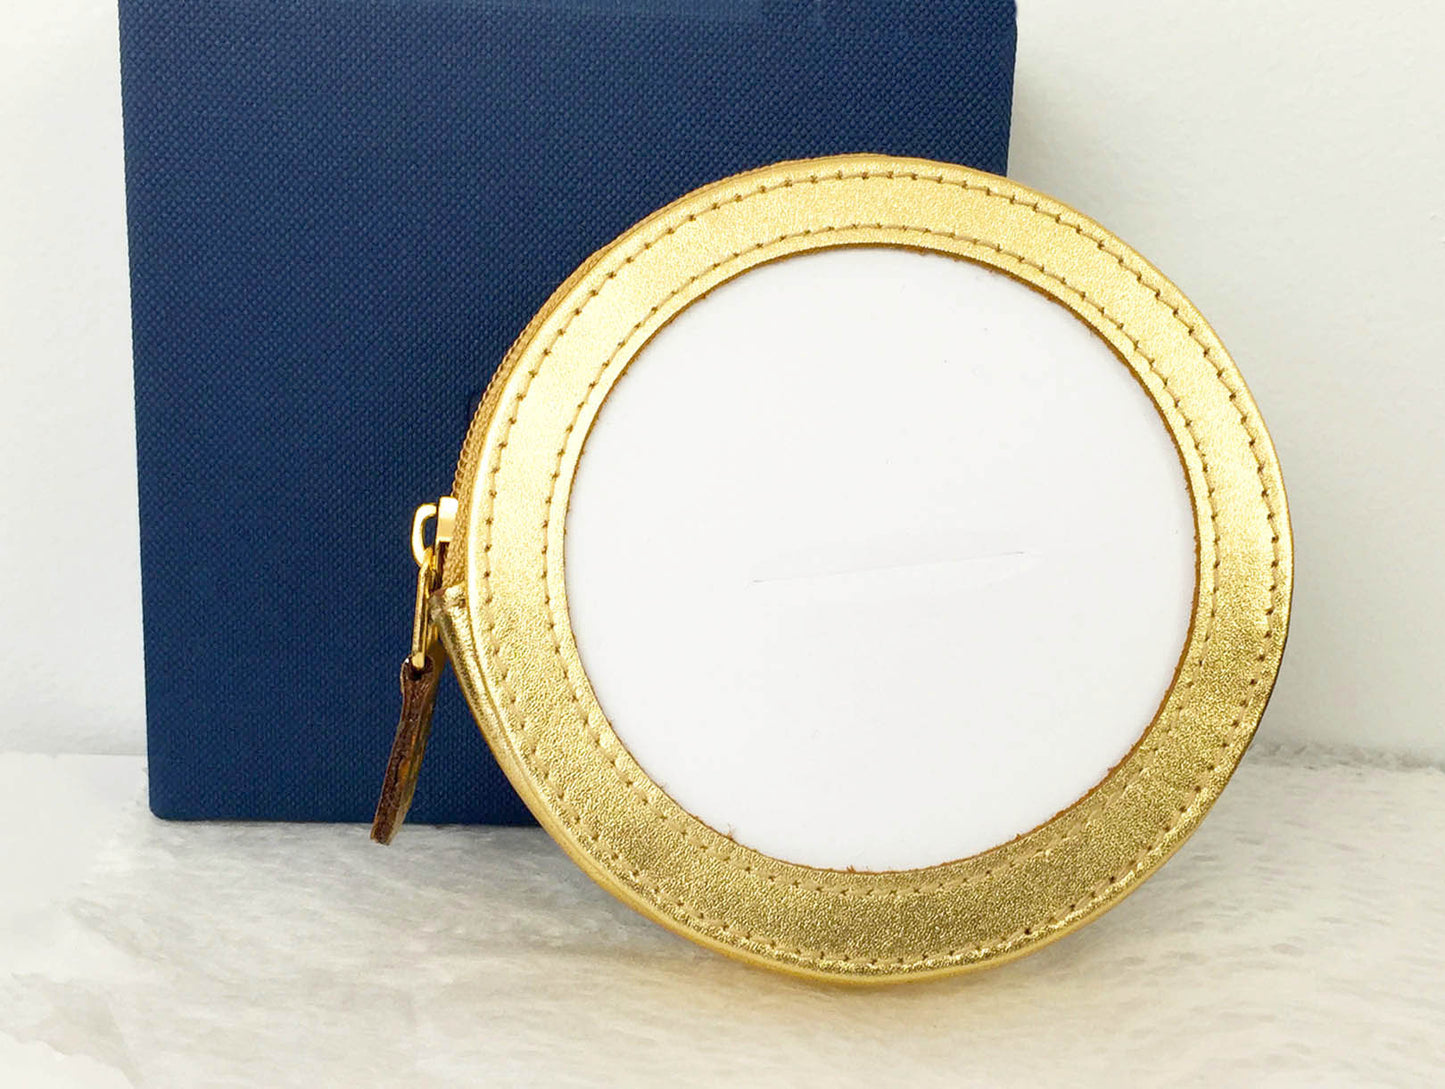 Accessory ~ Metallic Gold Premium Leather Zippered COIN PURSE CASE for a 3" Rd. Needlepoint Canvas by LEE